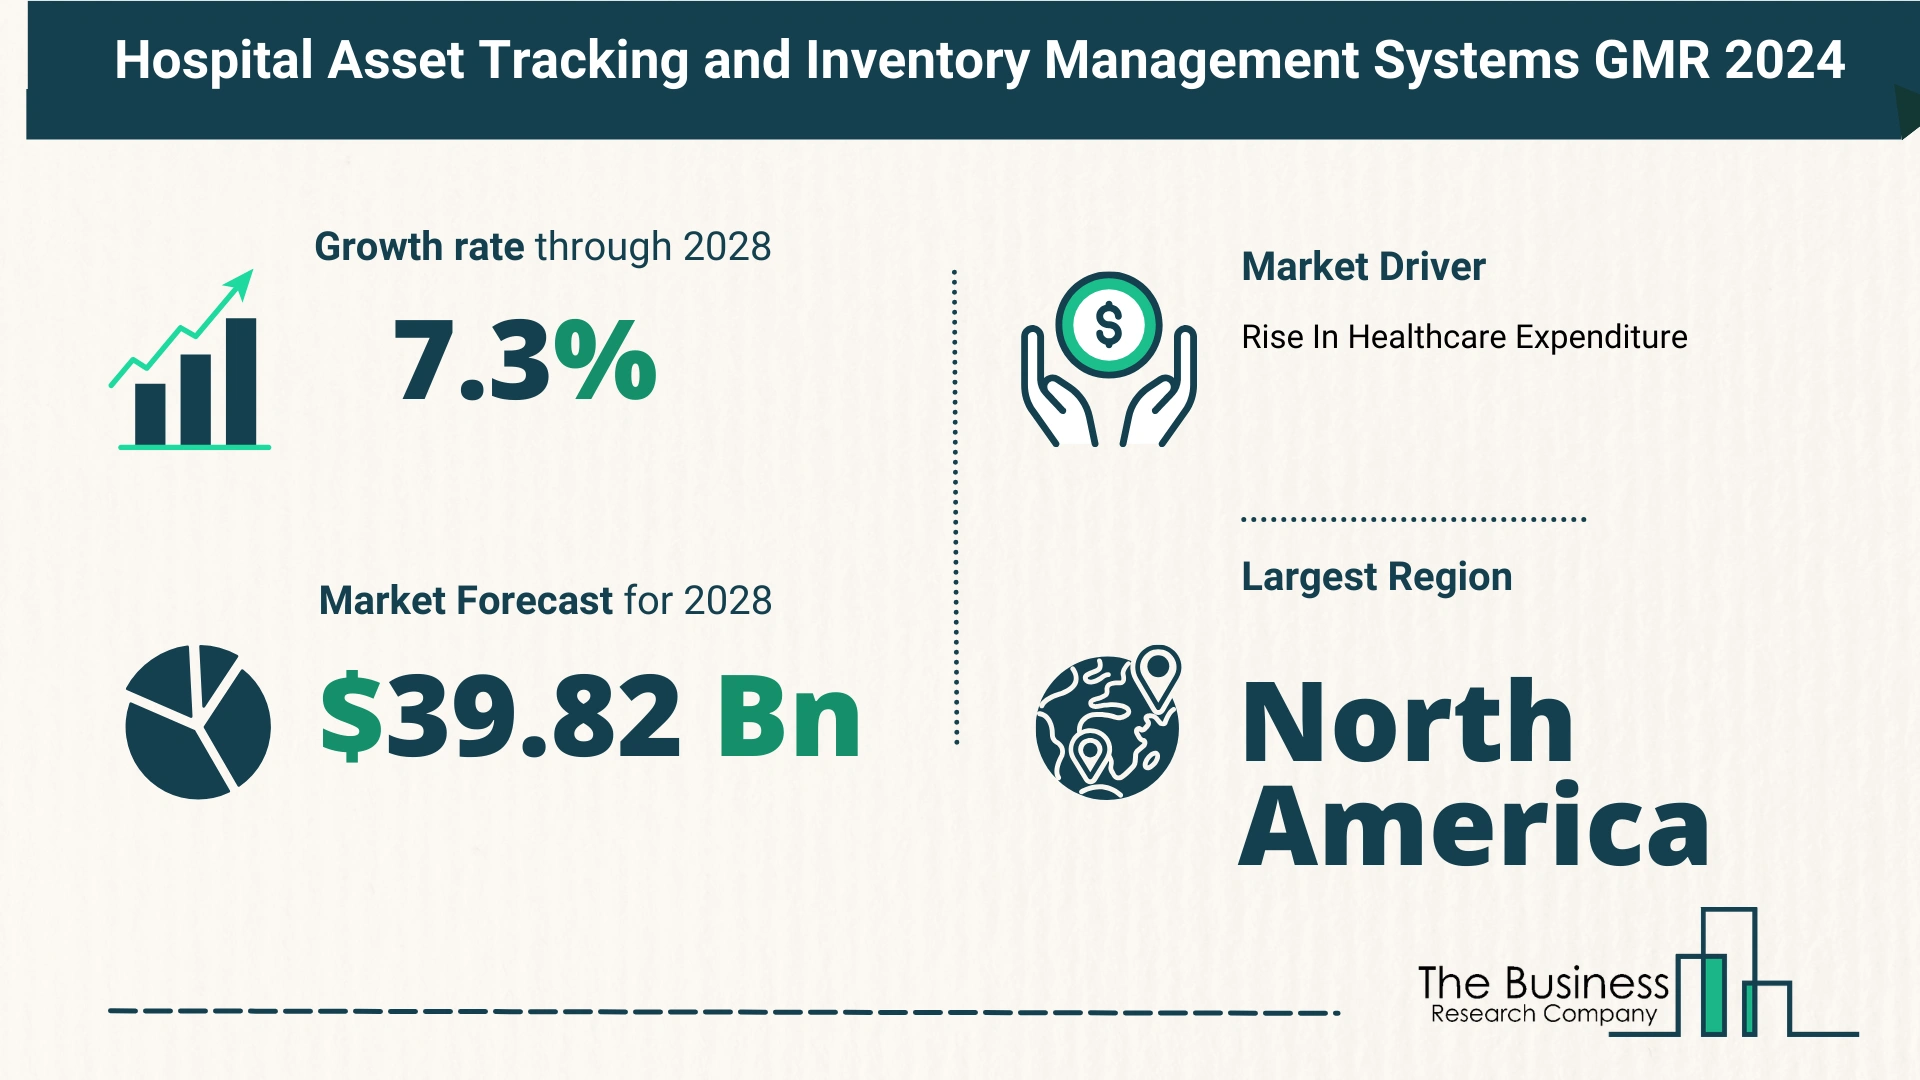 Top 5 Insights From The Hospital Asset Tracking and Inventory Management Systems Market Report 2024